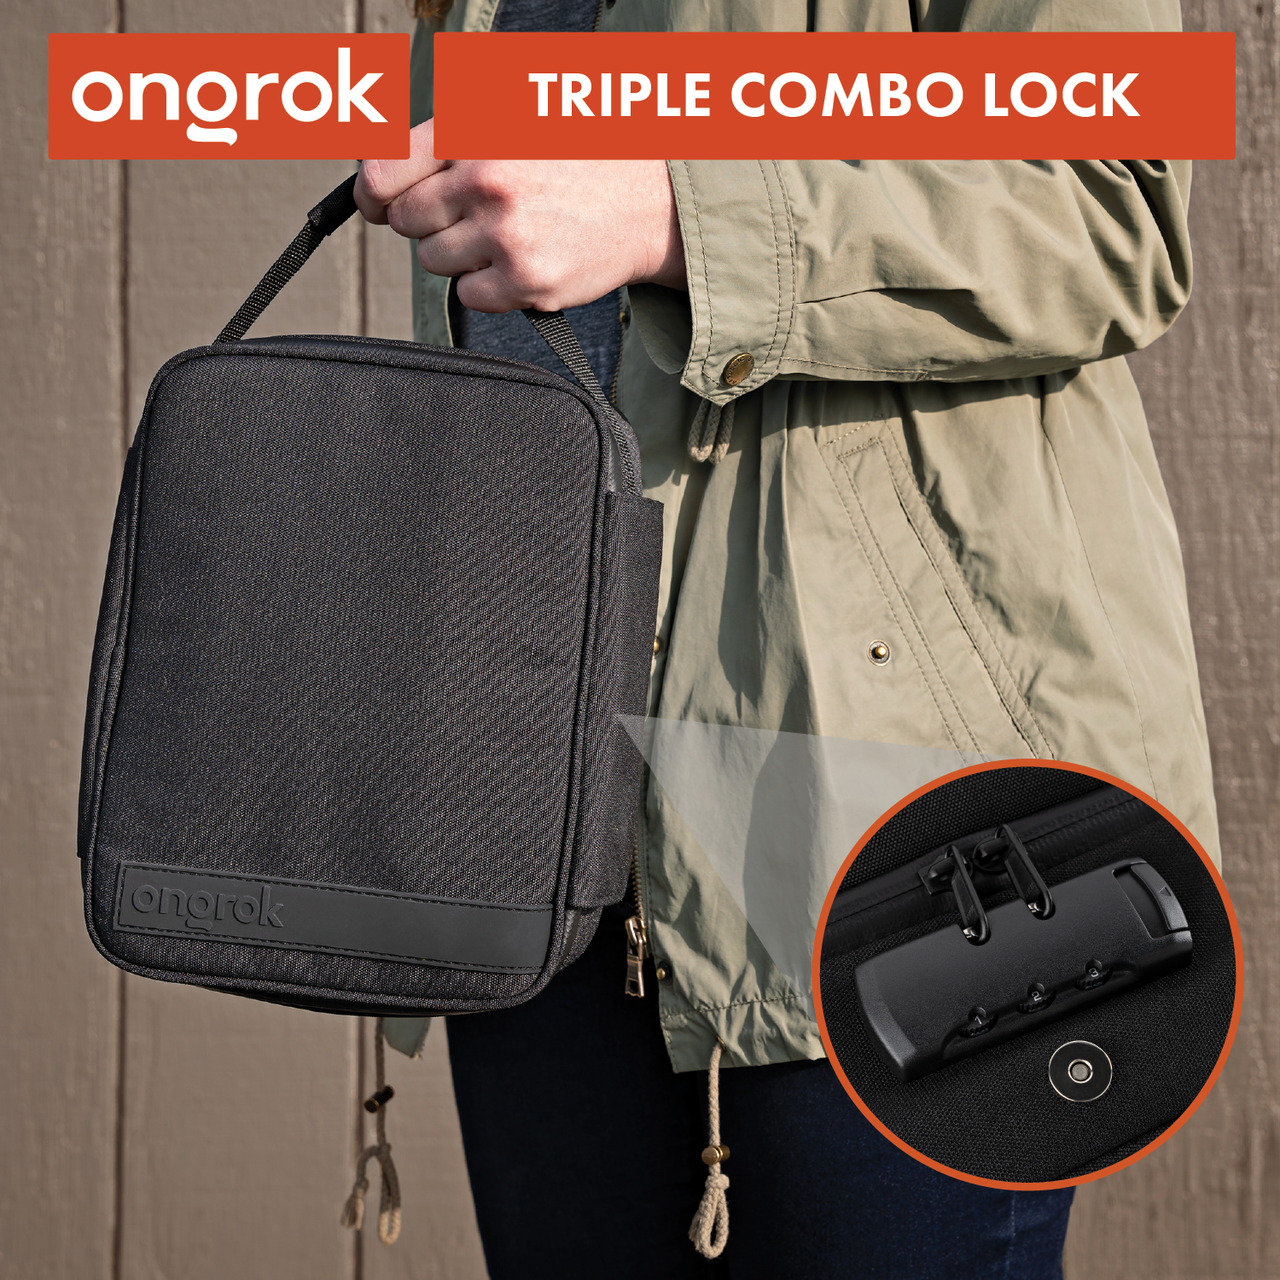 Ongrok Large Carbon-Lined Case with Combo Lock